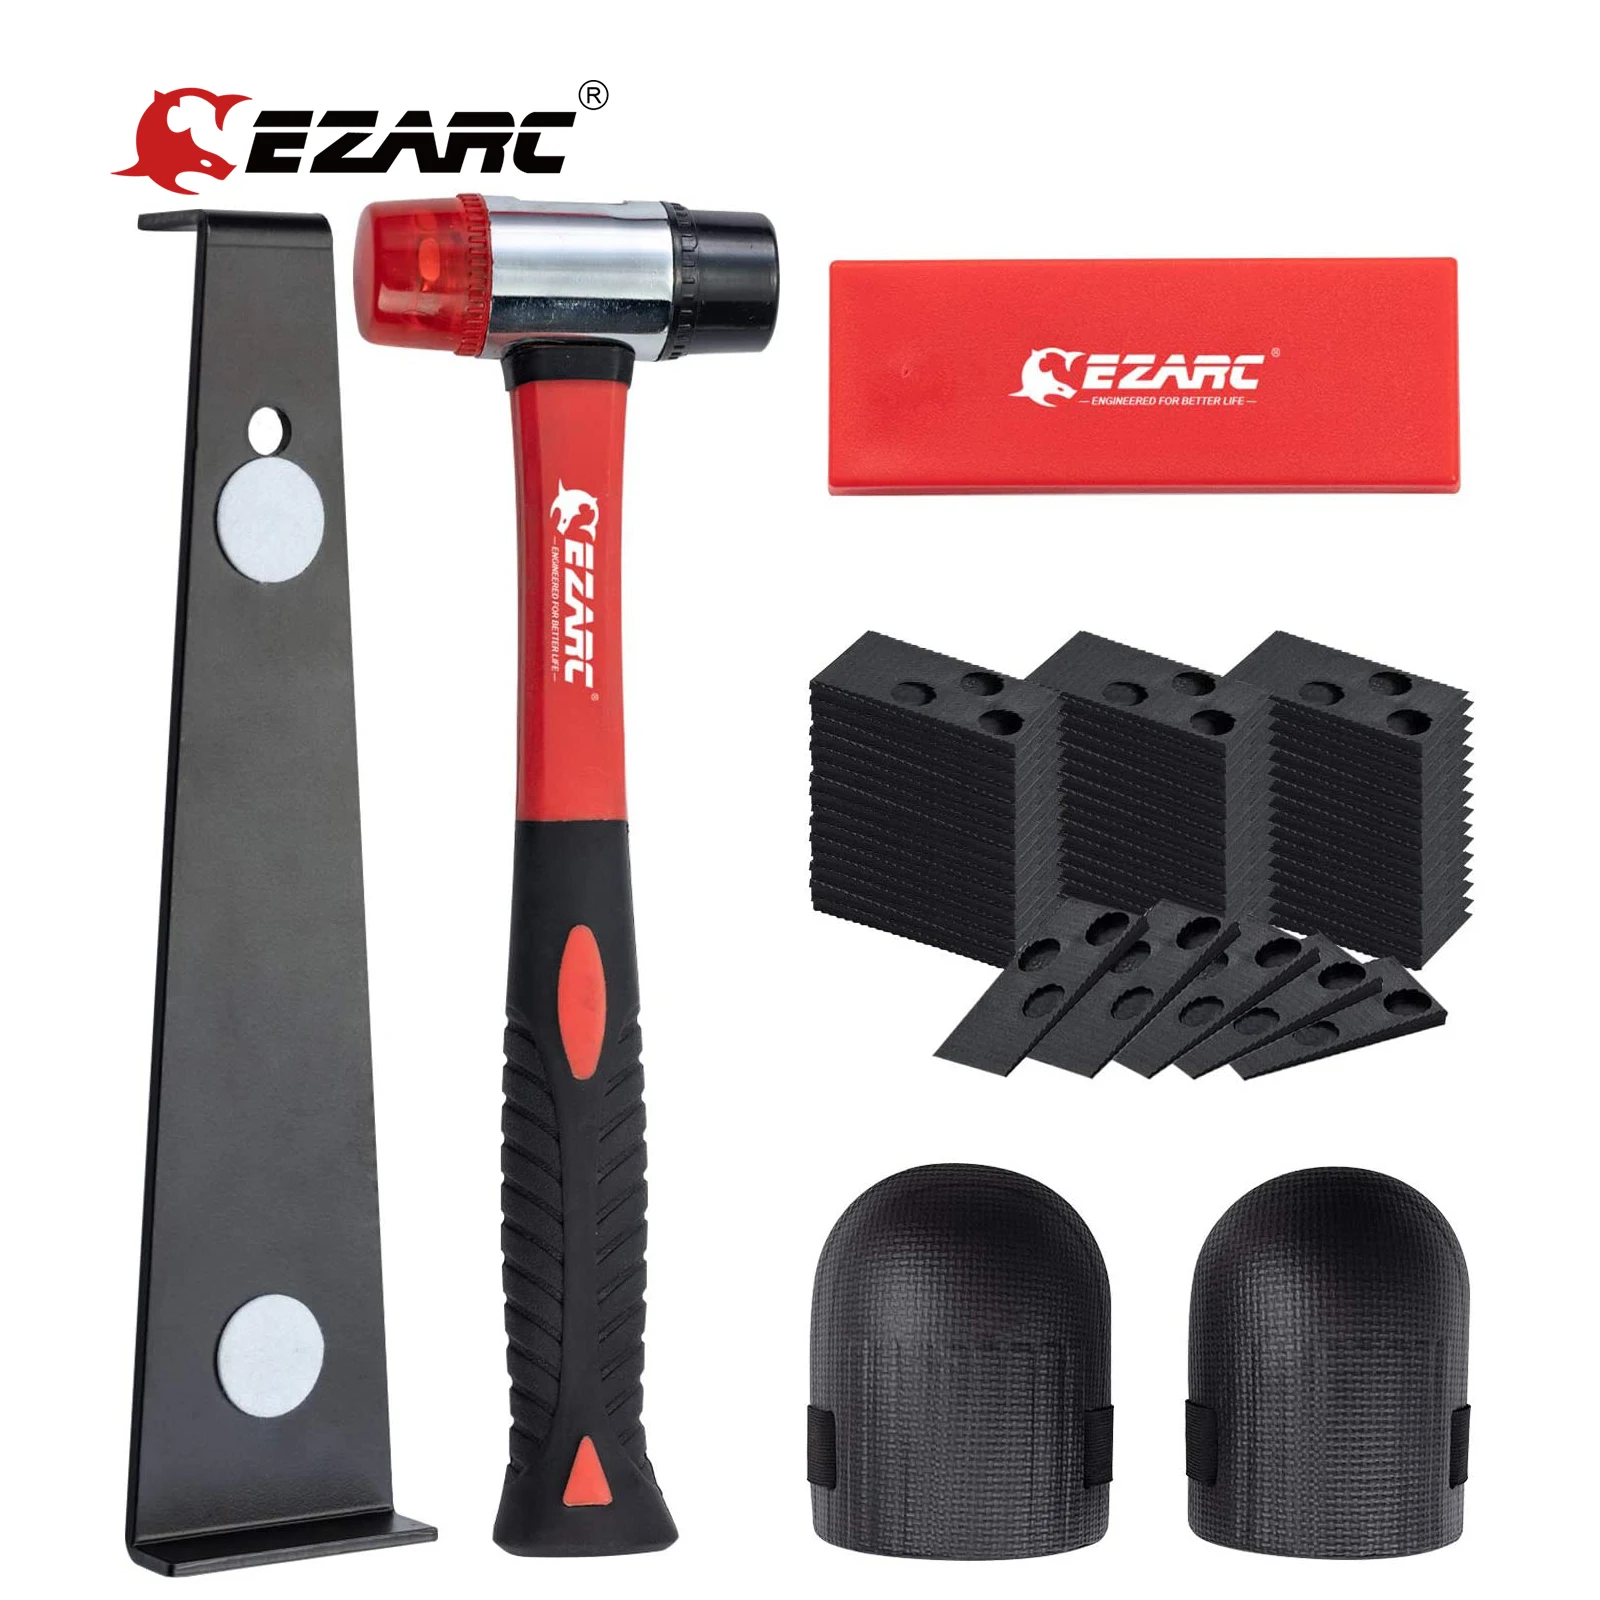 EZARC Laminate Wood Flooring Installation Kit with 60 Spacers,Pull Bar, Rubber Tapping Block, Double-Faced Mallet, Foam Kneepads laminate floor repair kit wood furniture crack mending set with handheld melting tool flooring finishing accessories